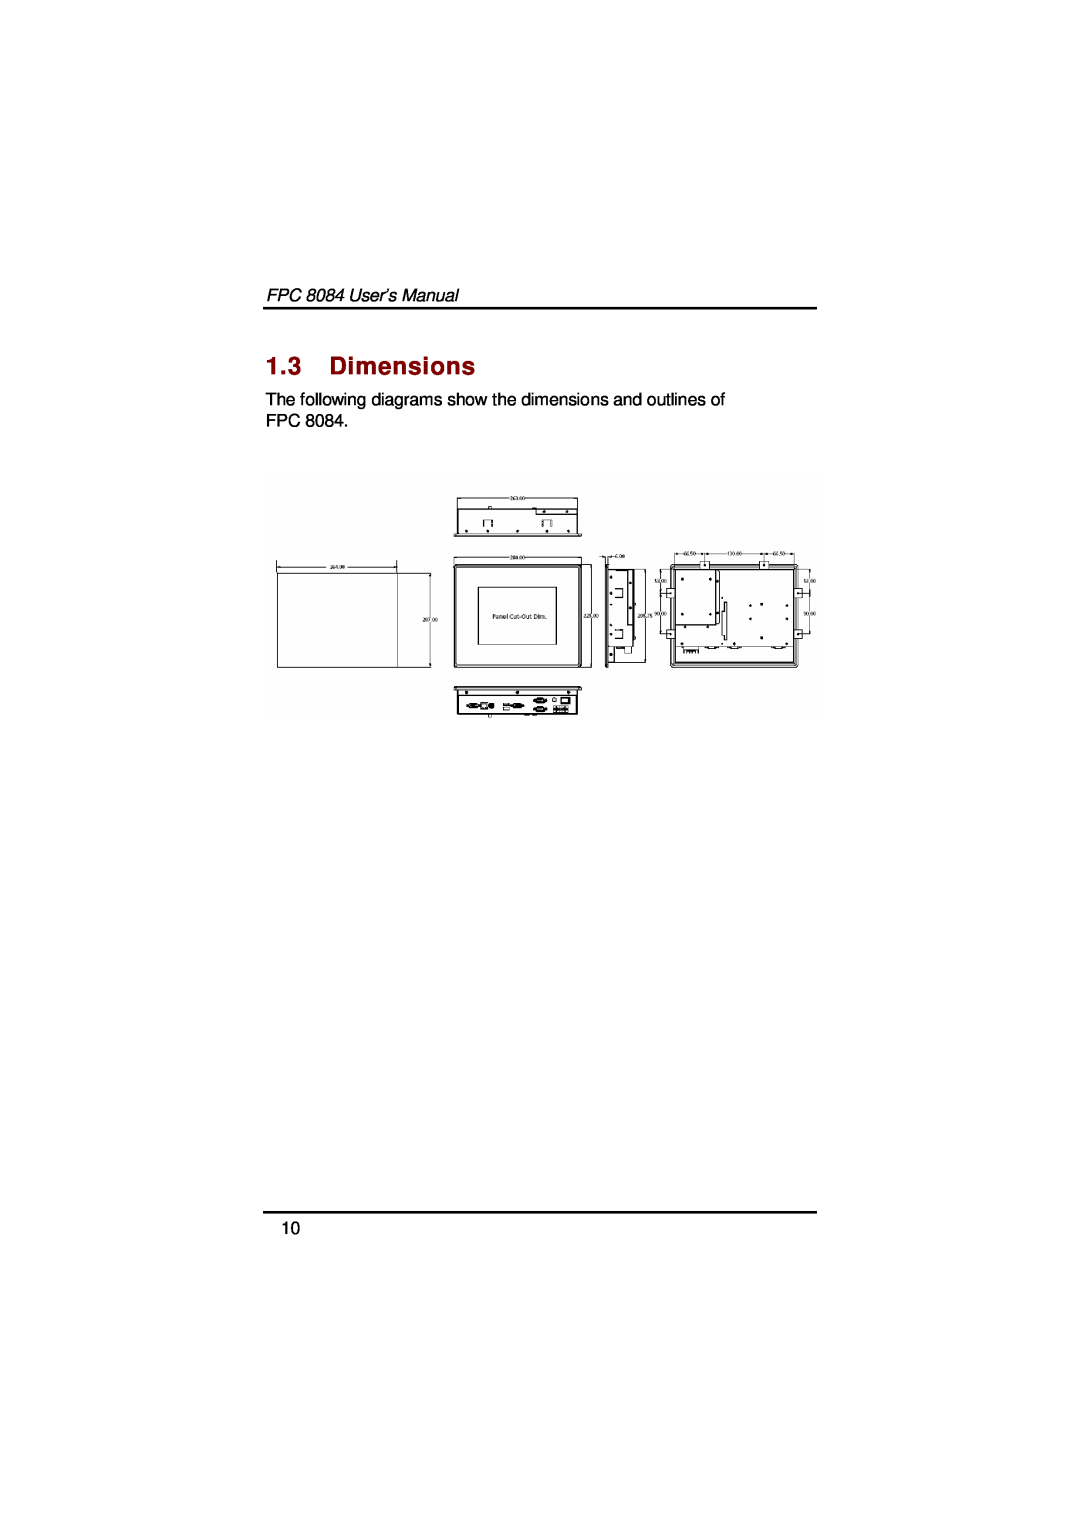 Acnodes user manual 1.3Dimensions, FPC 8084 User’s Manual 